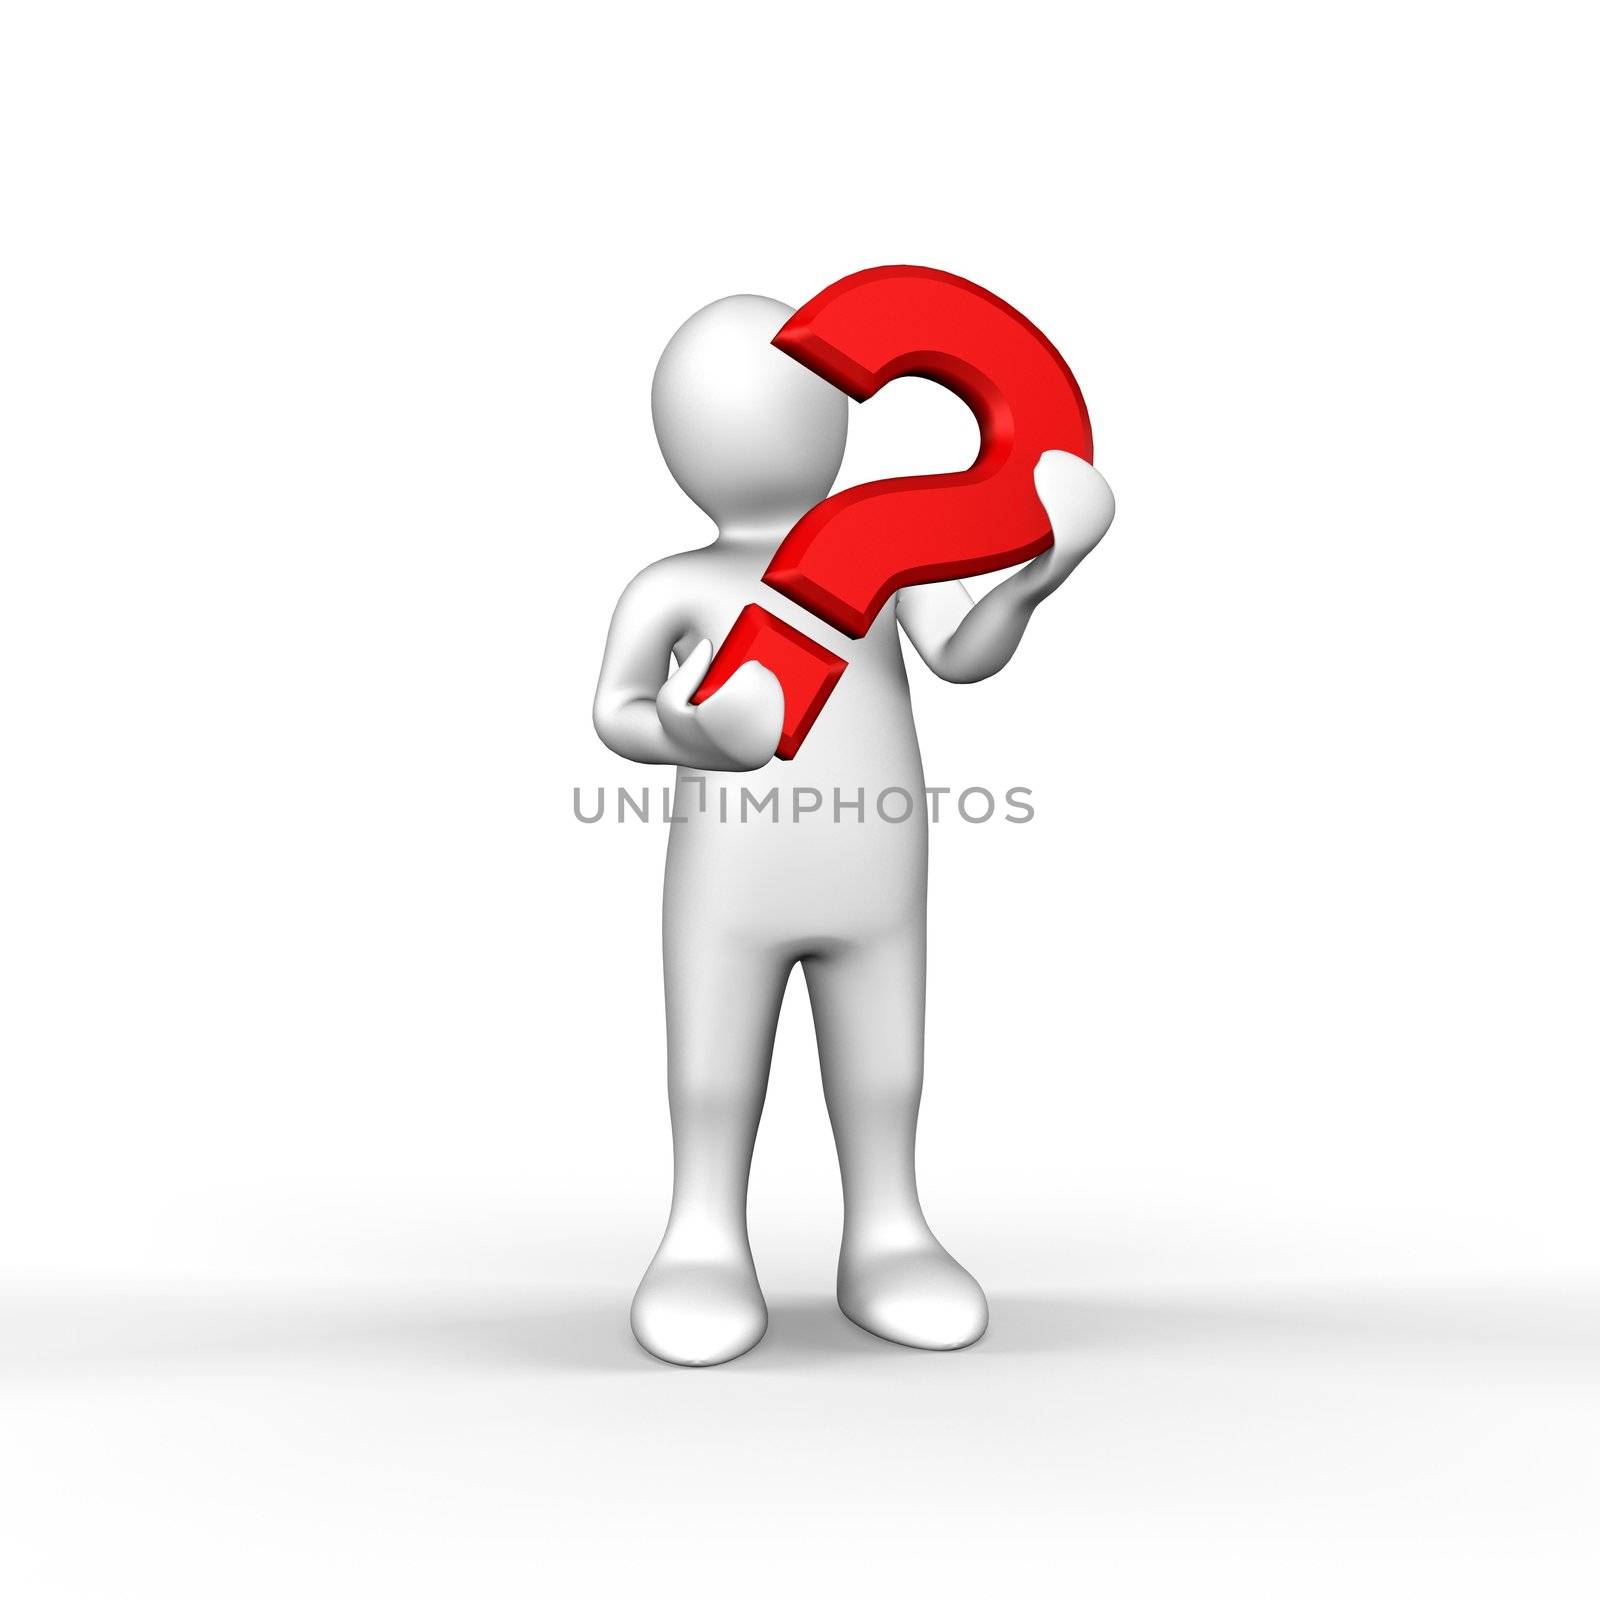 An illustrated white figure holding a red question mark